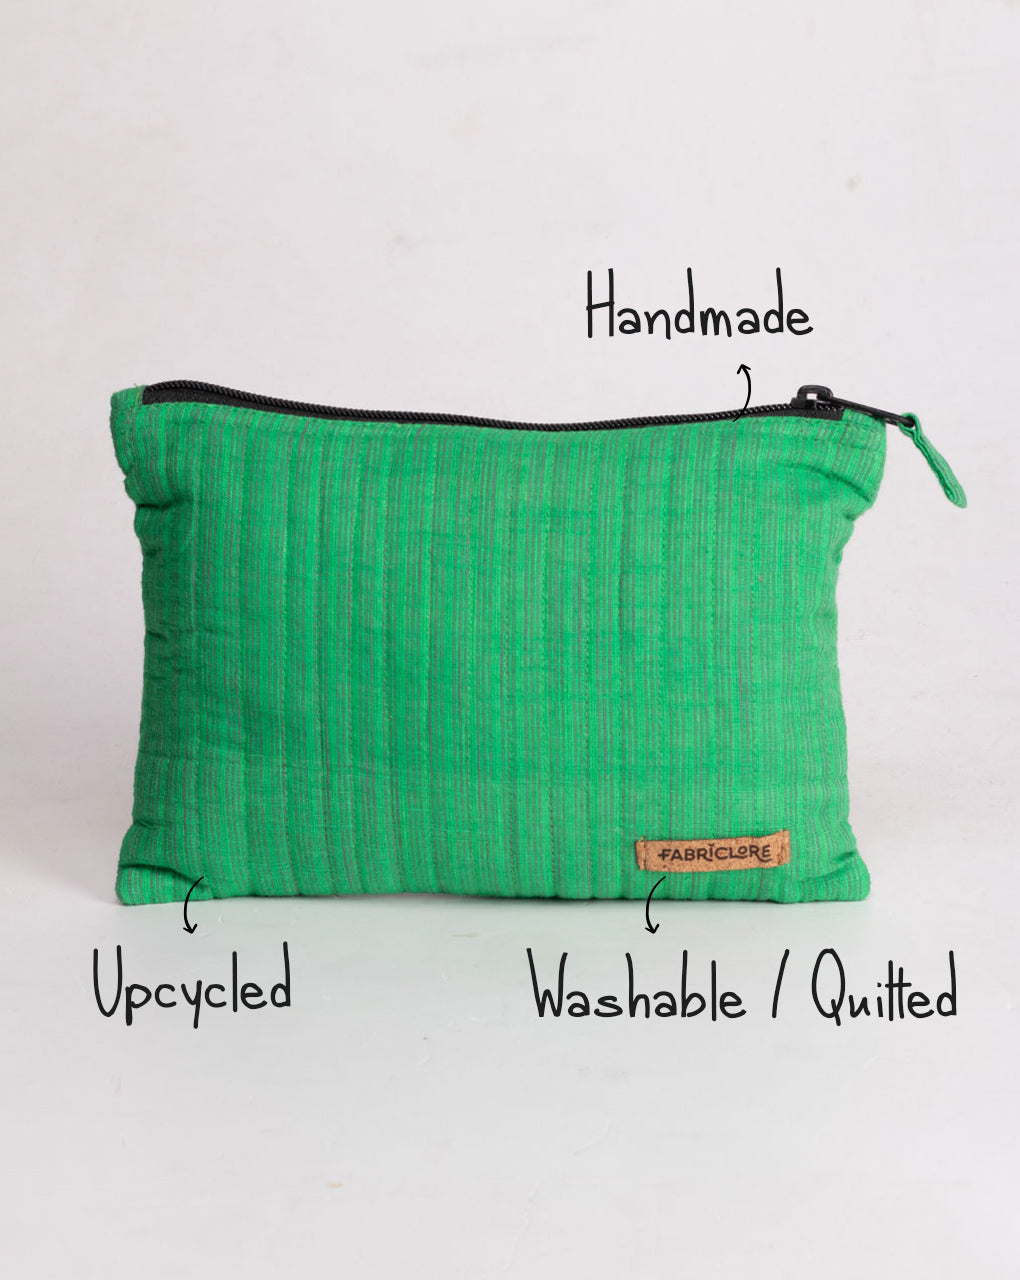 Upcycled Loom Textured Stripes Pouch - Fabriclore.com